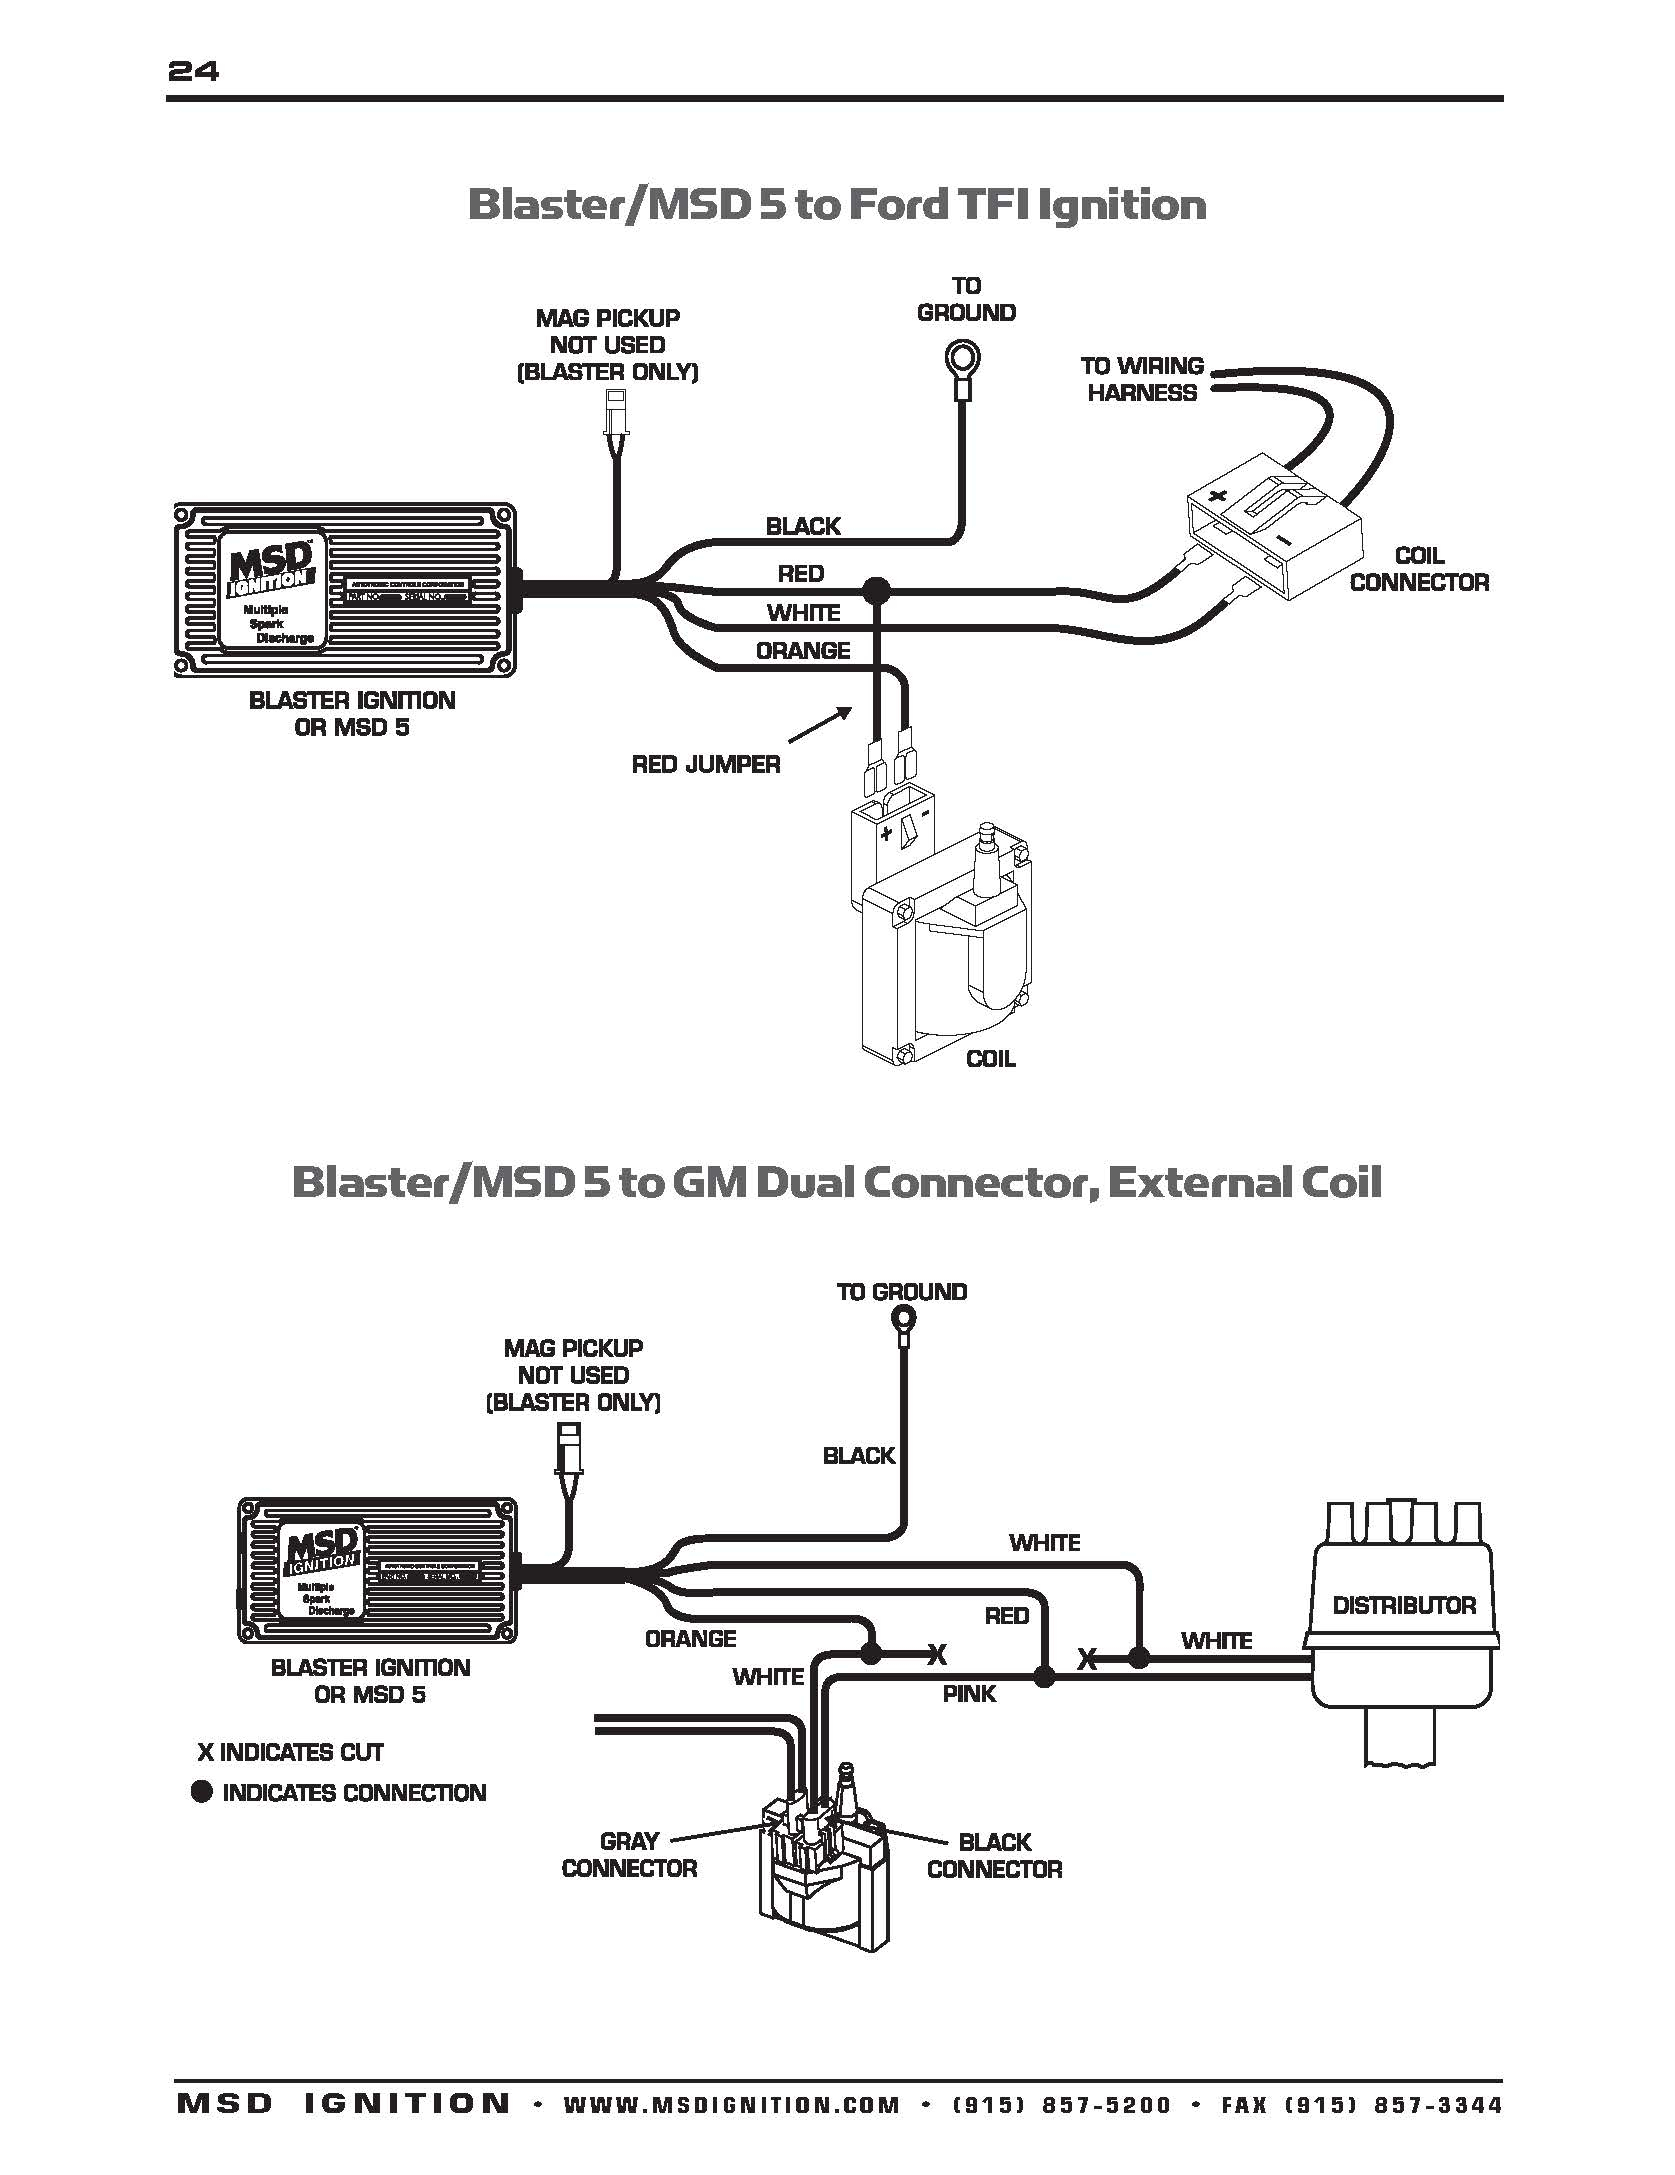 Msd Distributor Wiring Diagram Two Wire - Wiring Diagrams Hubs - Msd Wiring Diagram